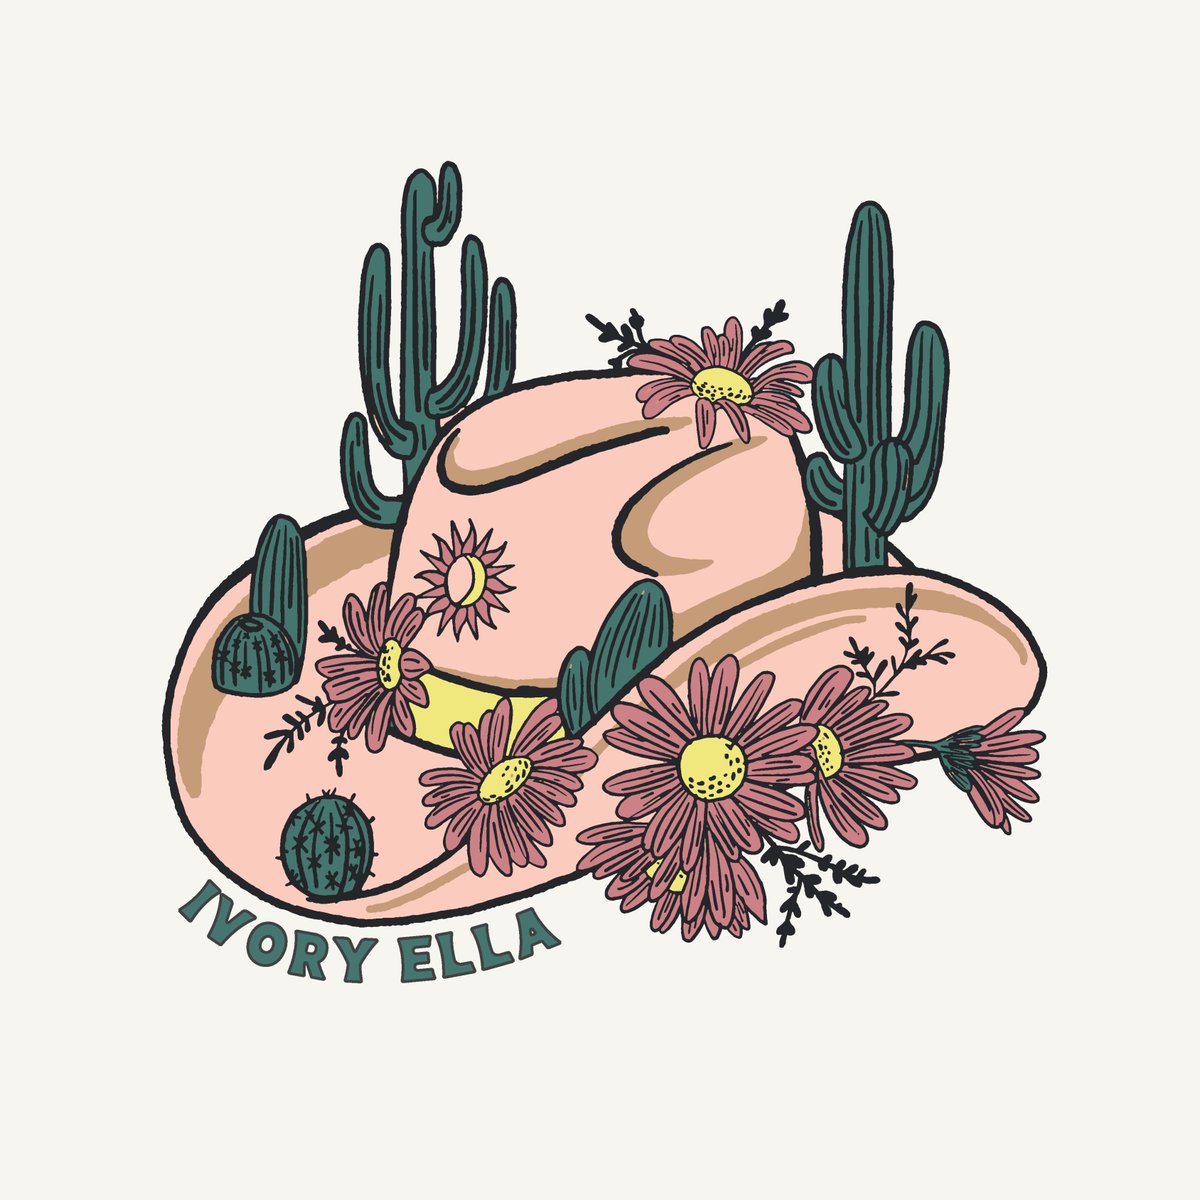 Ivory Ella is taking a trip to the Wild Wild West, who's coming with us?!🤠 Help us decide which t-shirt designs to launch TOMORROW. Comment the matching emoji of your fav👇 1. 🌵 2. 🗺️ 3. 🤠 ivoryella.com